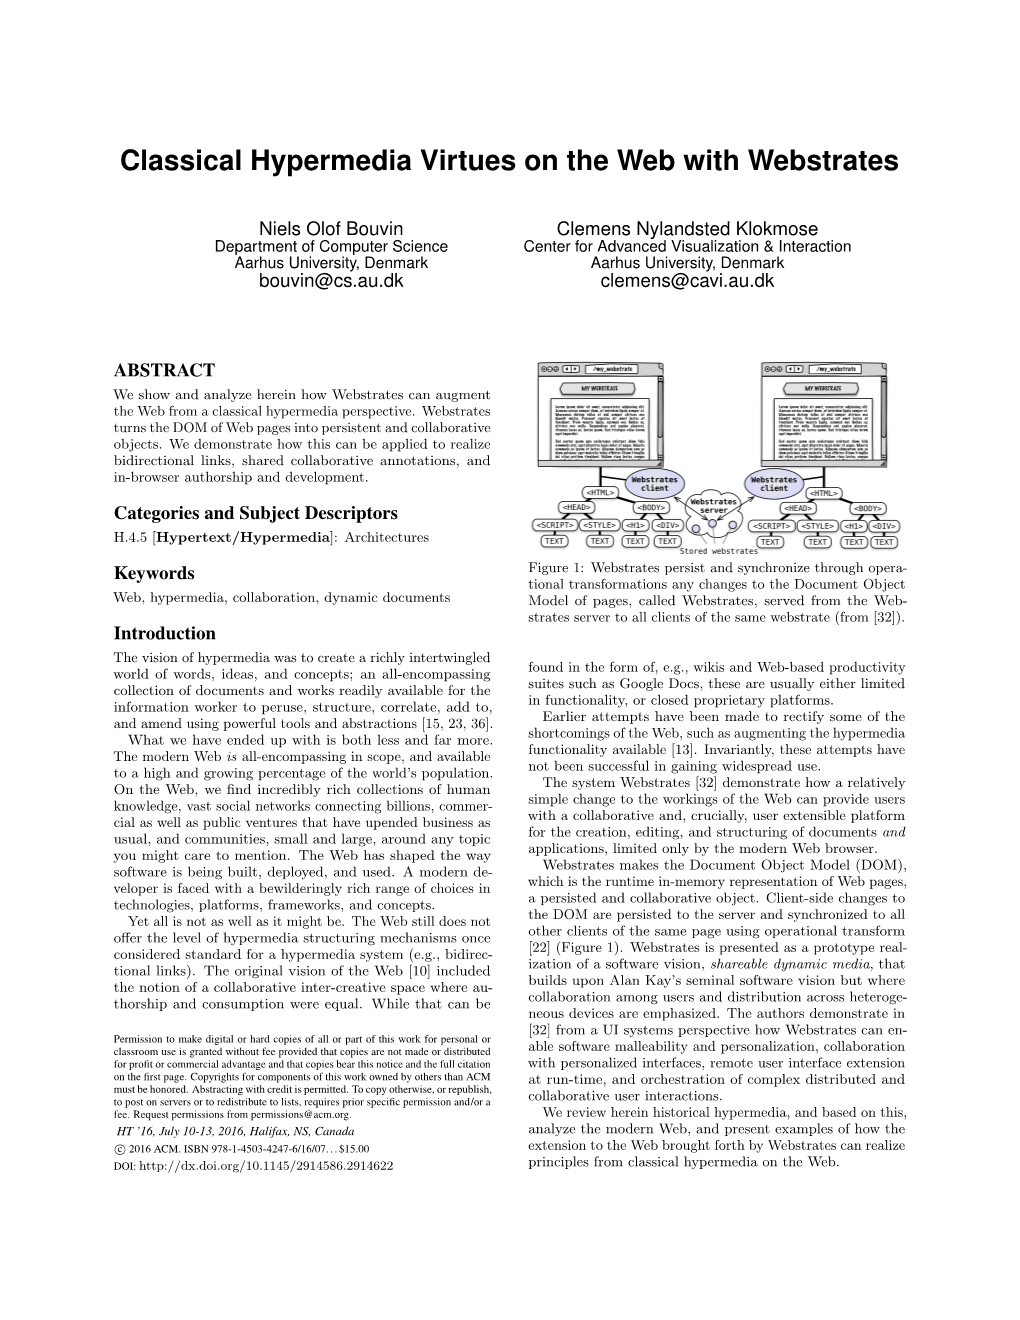 Classical Hypermedia Virtues on the Web with Webstrates